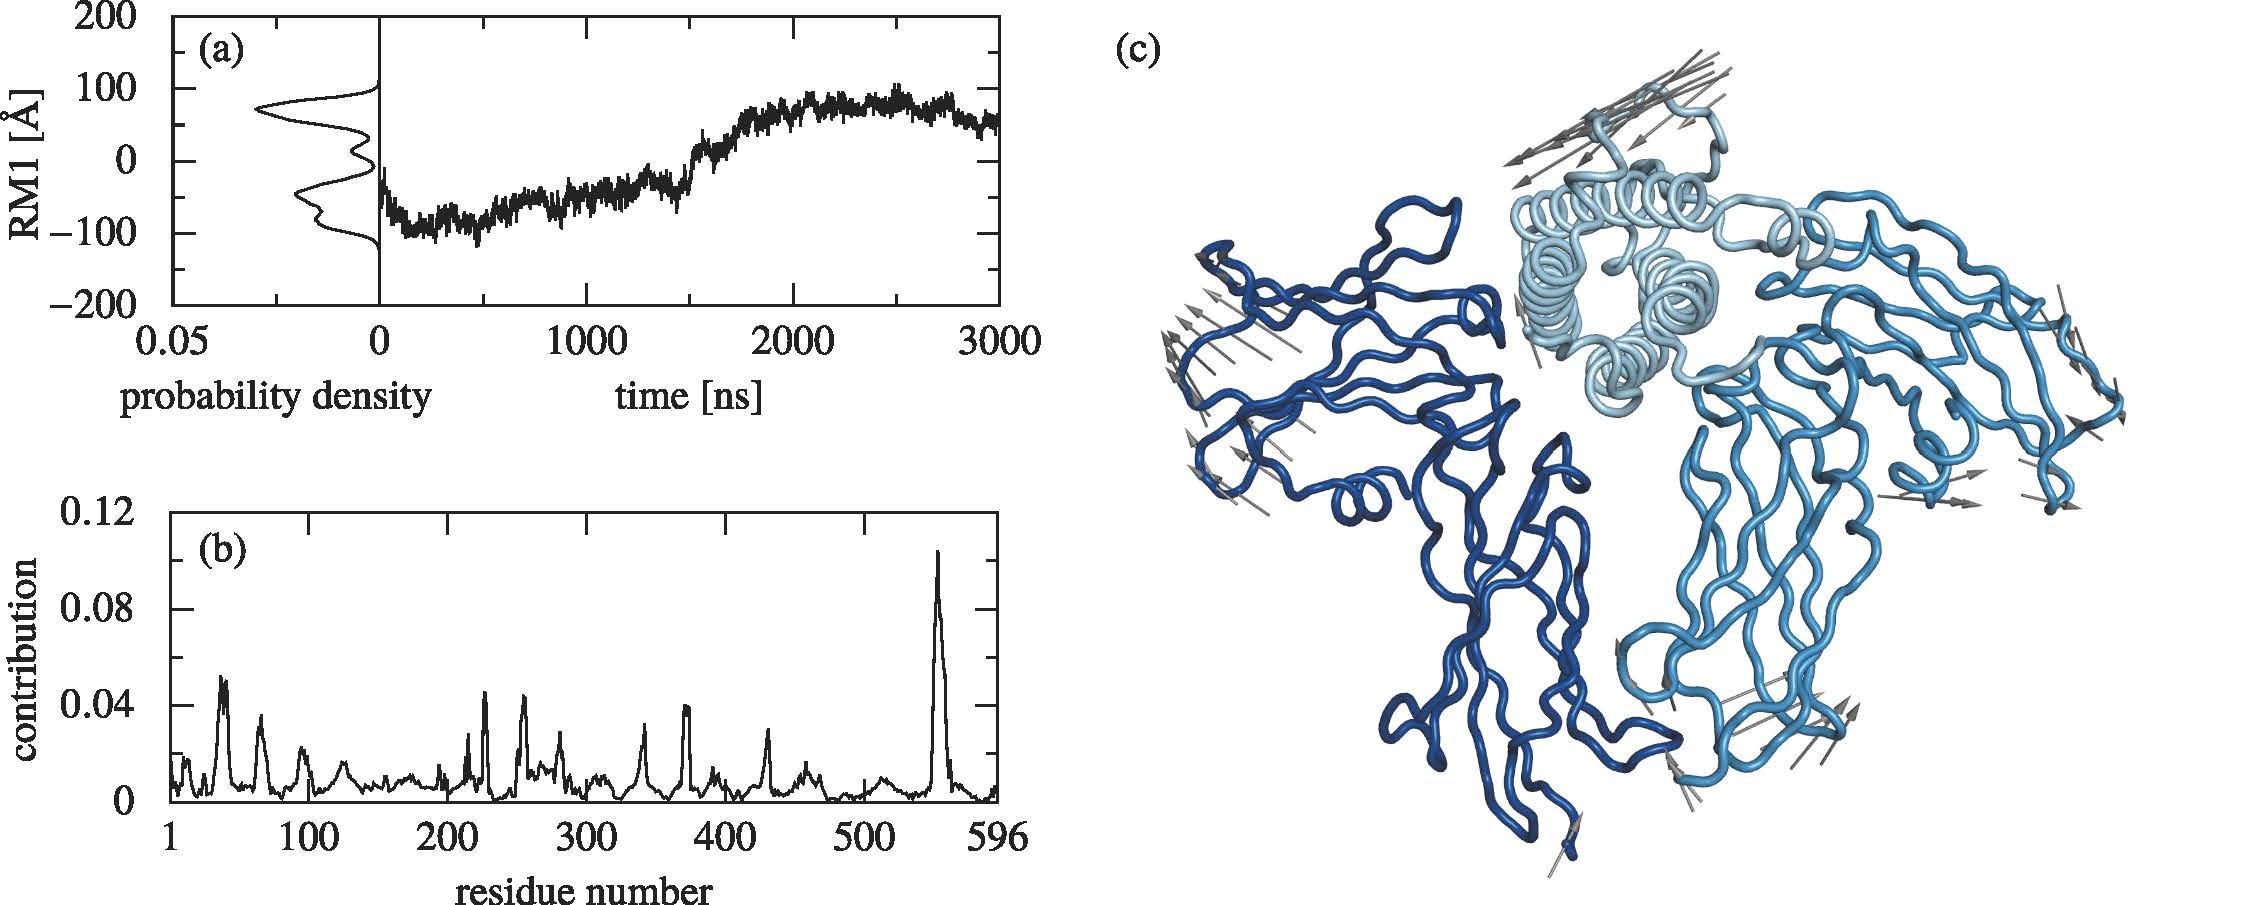 Reproduced from “Identification of slow relaxation modes in a protein trimer via positive definite relaxation mode analysis,” N. Karasawa, A. Mitsutake, and H. Takano, J. Chem. Phys. 150, 084113 (2019) and licensed under CC BY 4.0 © 2019 N. Karasawa, A. Mitsutake, and H. Takano